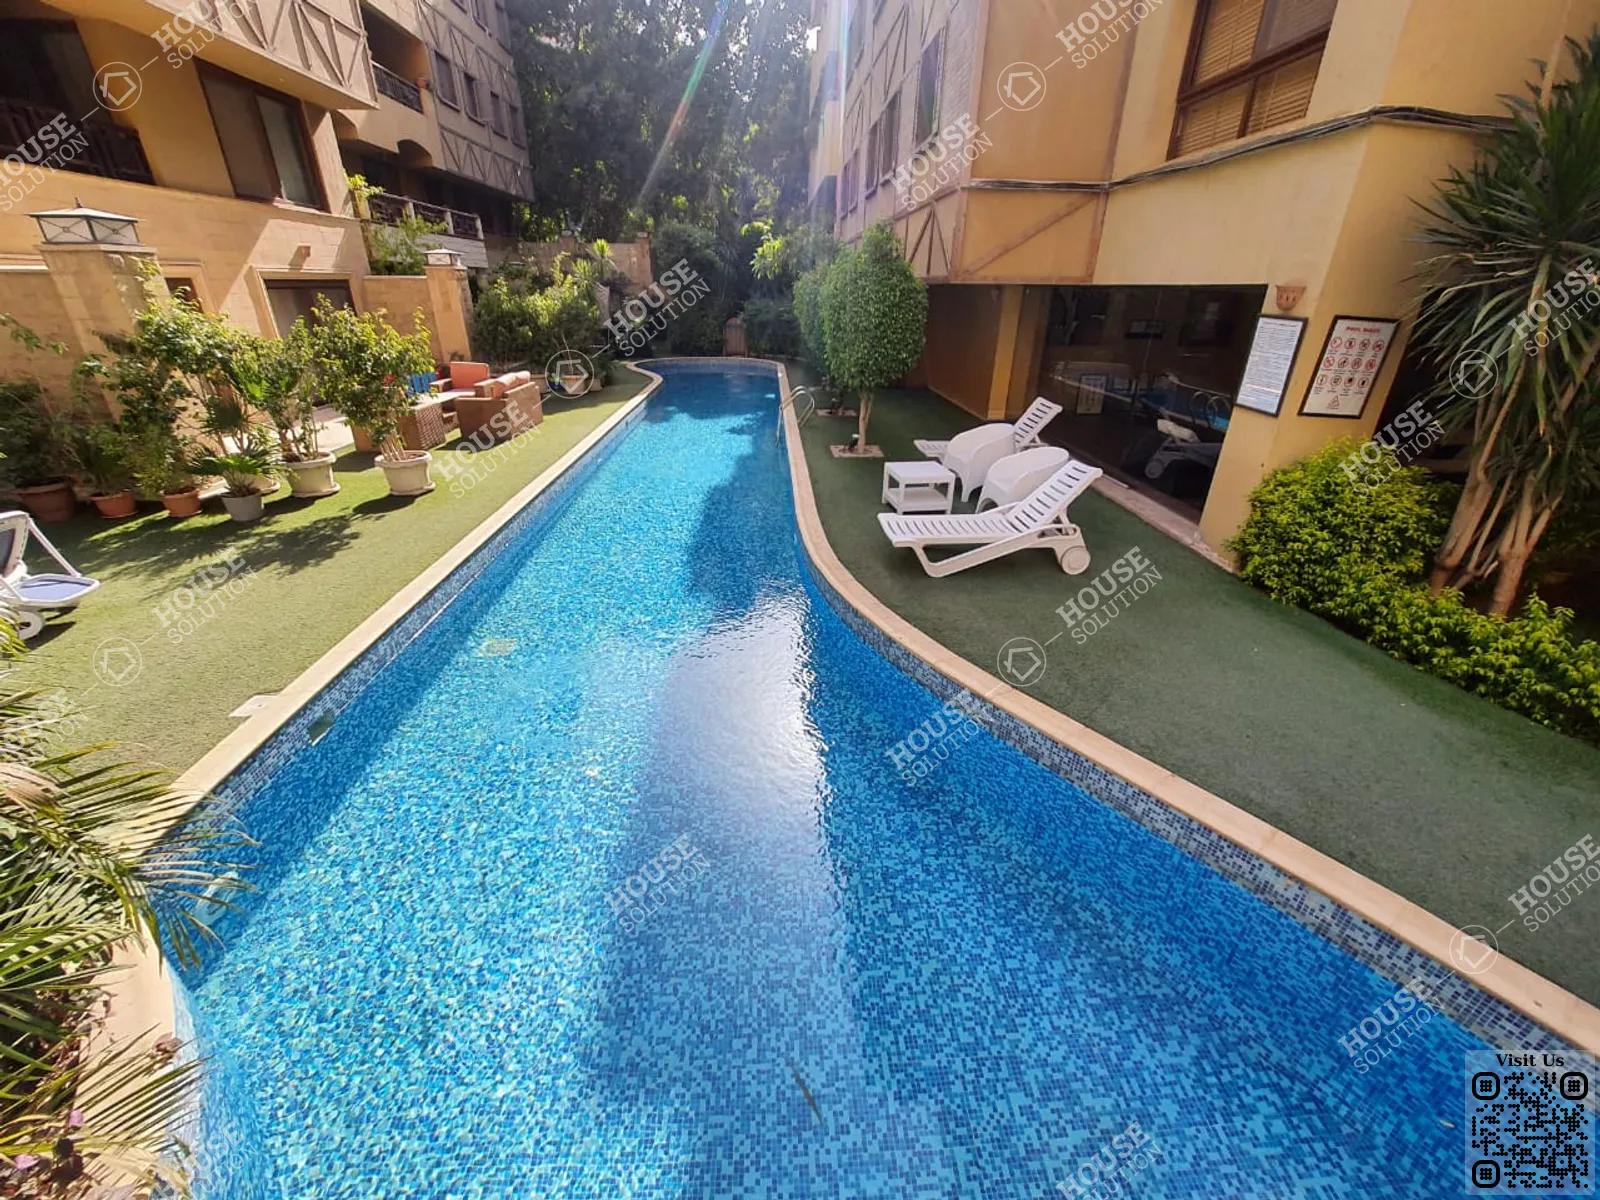 SHARED SWIMMING POOL  @ Apartments For Rent In Maadi Maadi Sarayat Area: 180 m² consists of 3 Bedrooms 3 Bathrooms Furnished 5 stars #5499-1